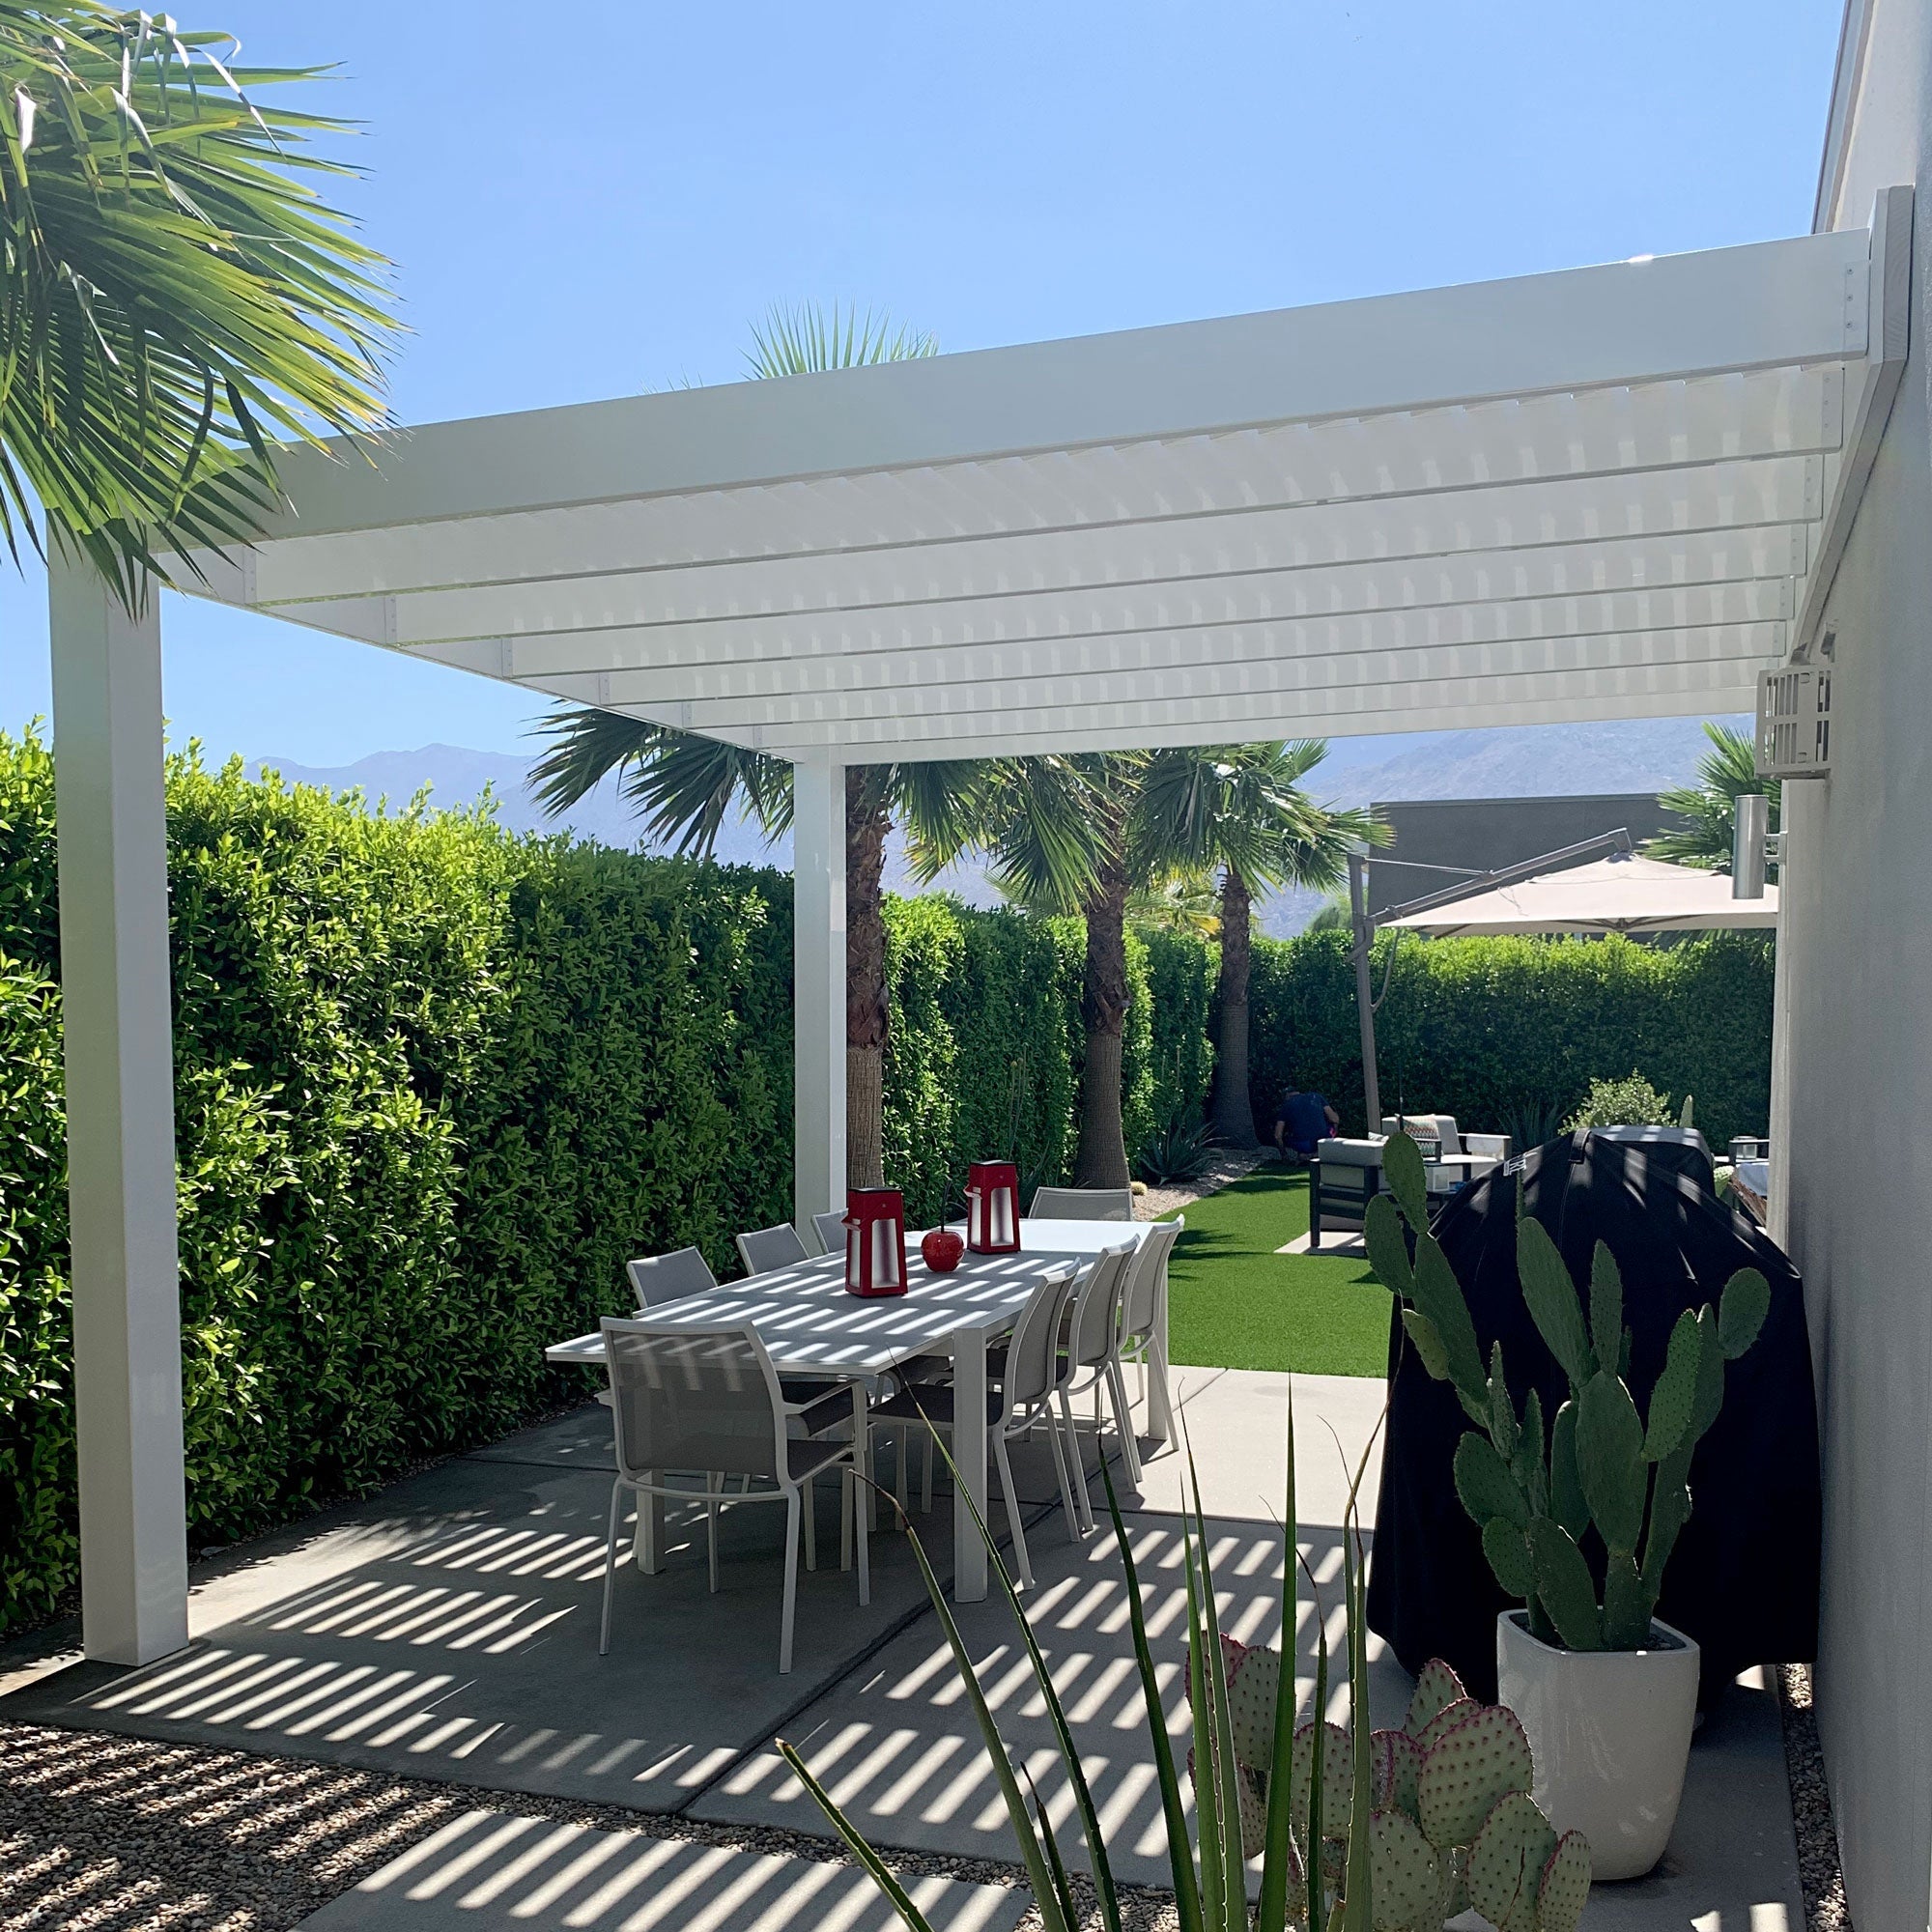 2-post white vinyl modern pergola attached to the side of a house providing shade for an outdoor dining set